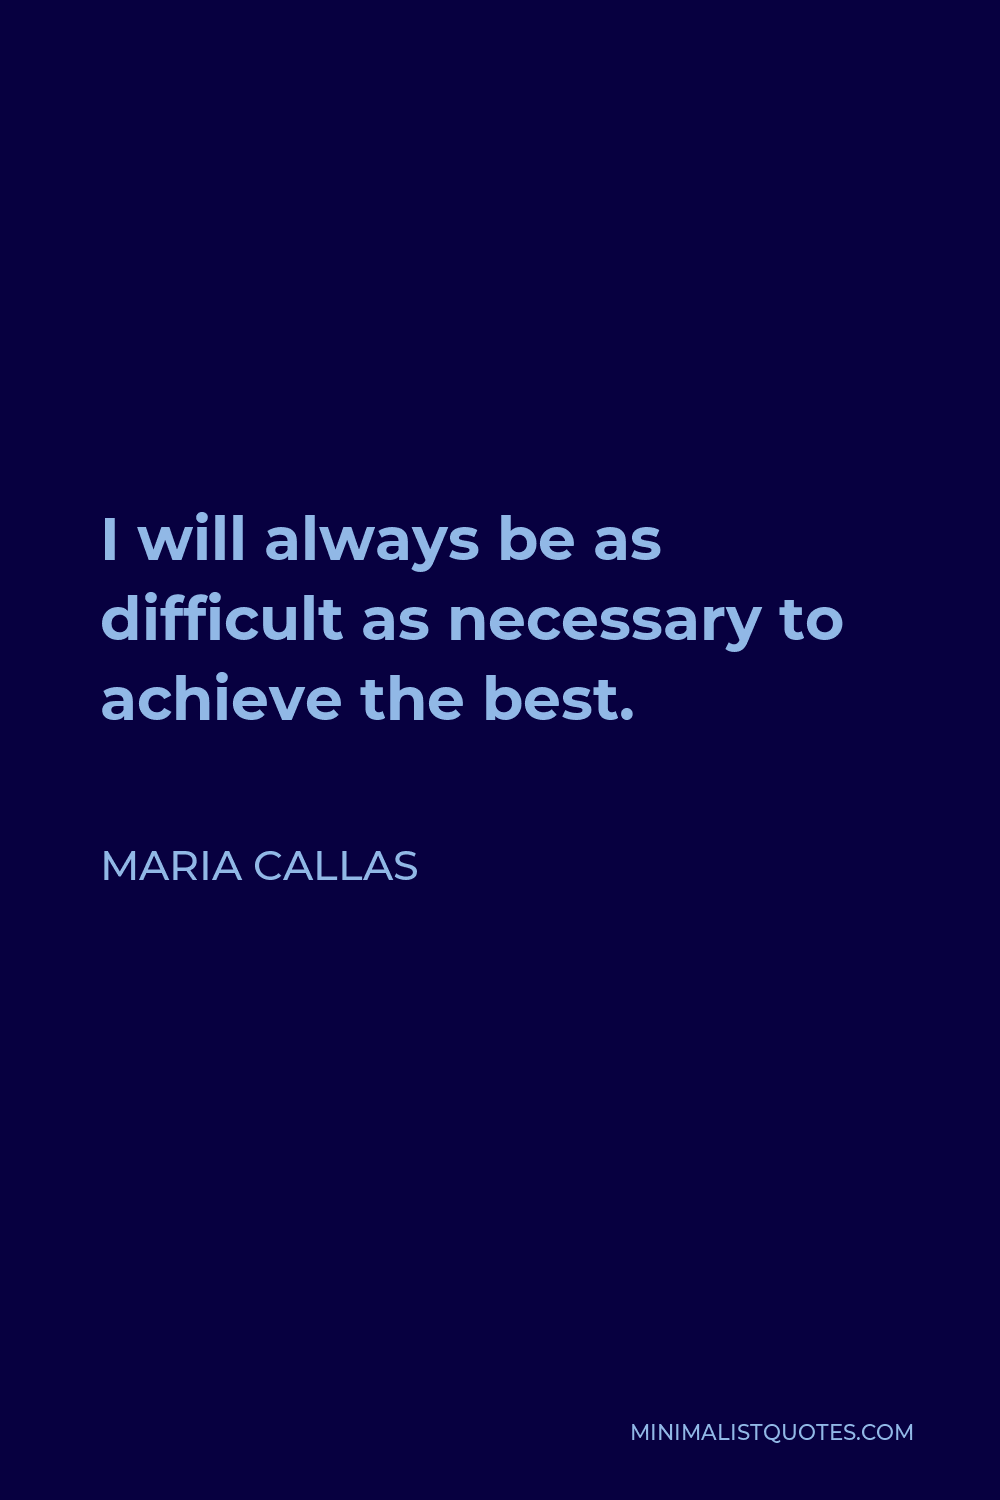 Maria Callas Quote - I will always be as difficult as necessary to achieve the best.